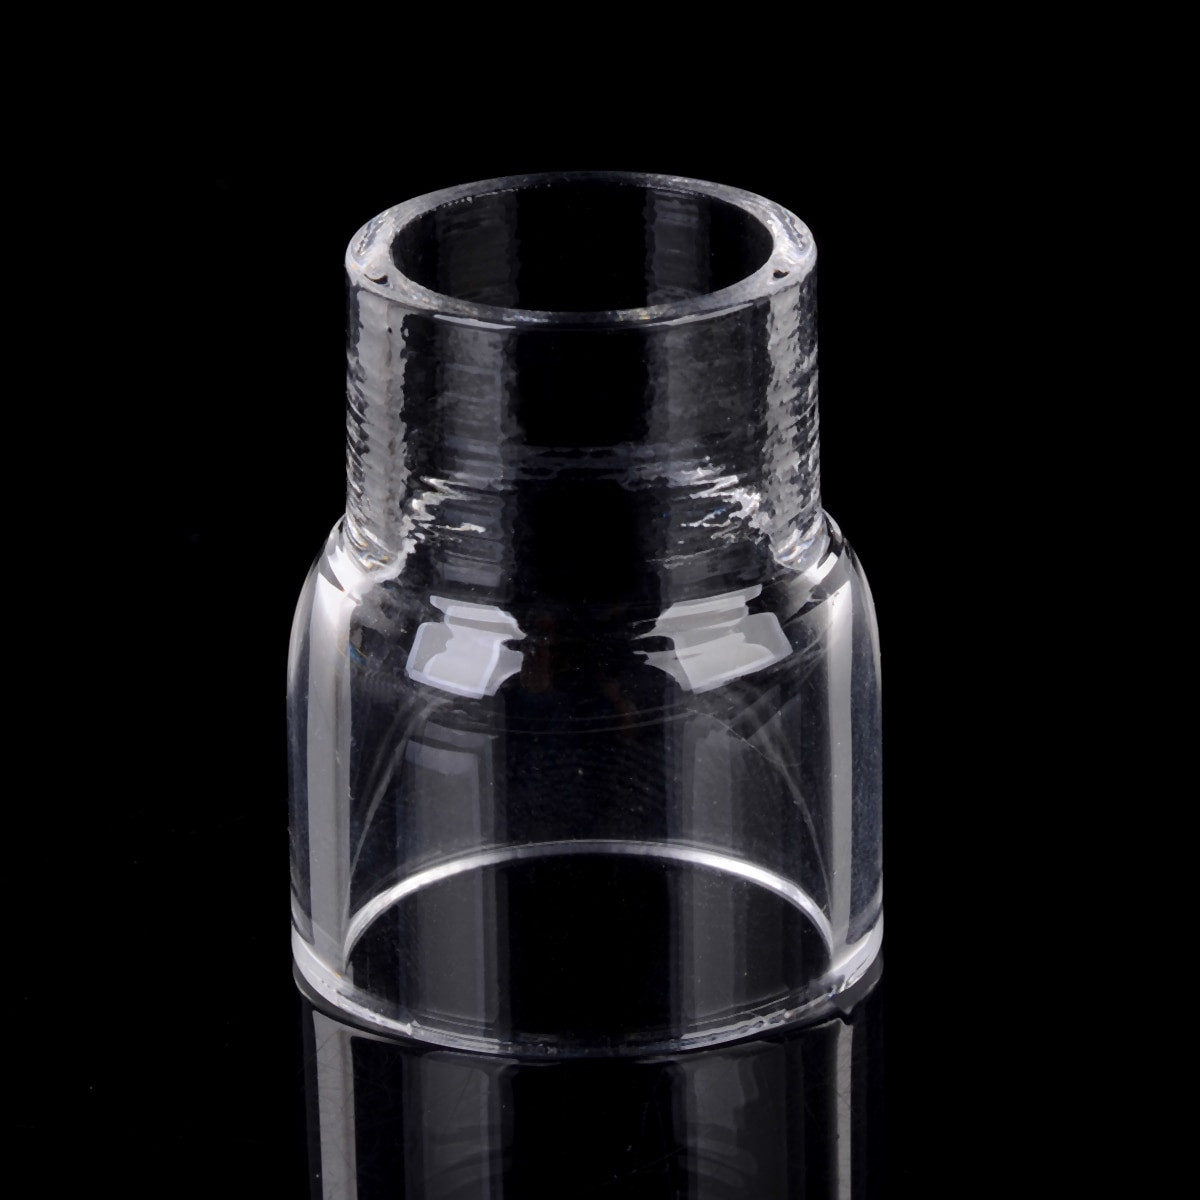 6 x 20 cylinder vase of 1pc 192330mm 12 pyrex cup glass transparent gas saver lens for within 1pc 192330mm 12 pyrex cup glass transparent gas saver lens for